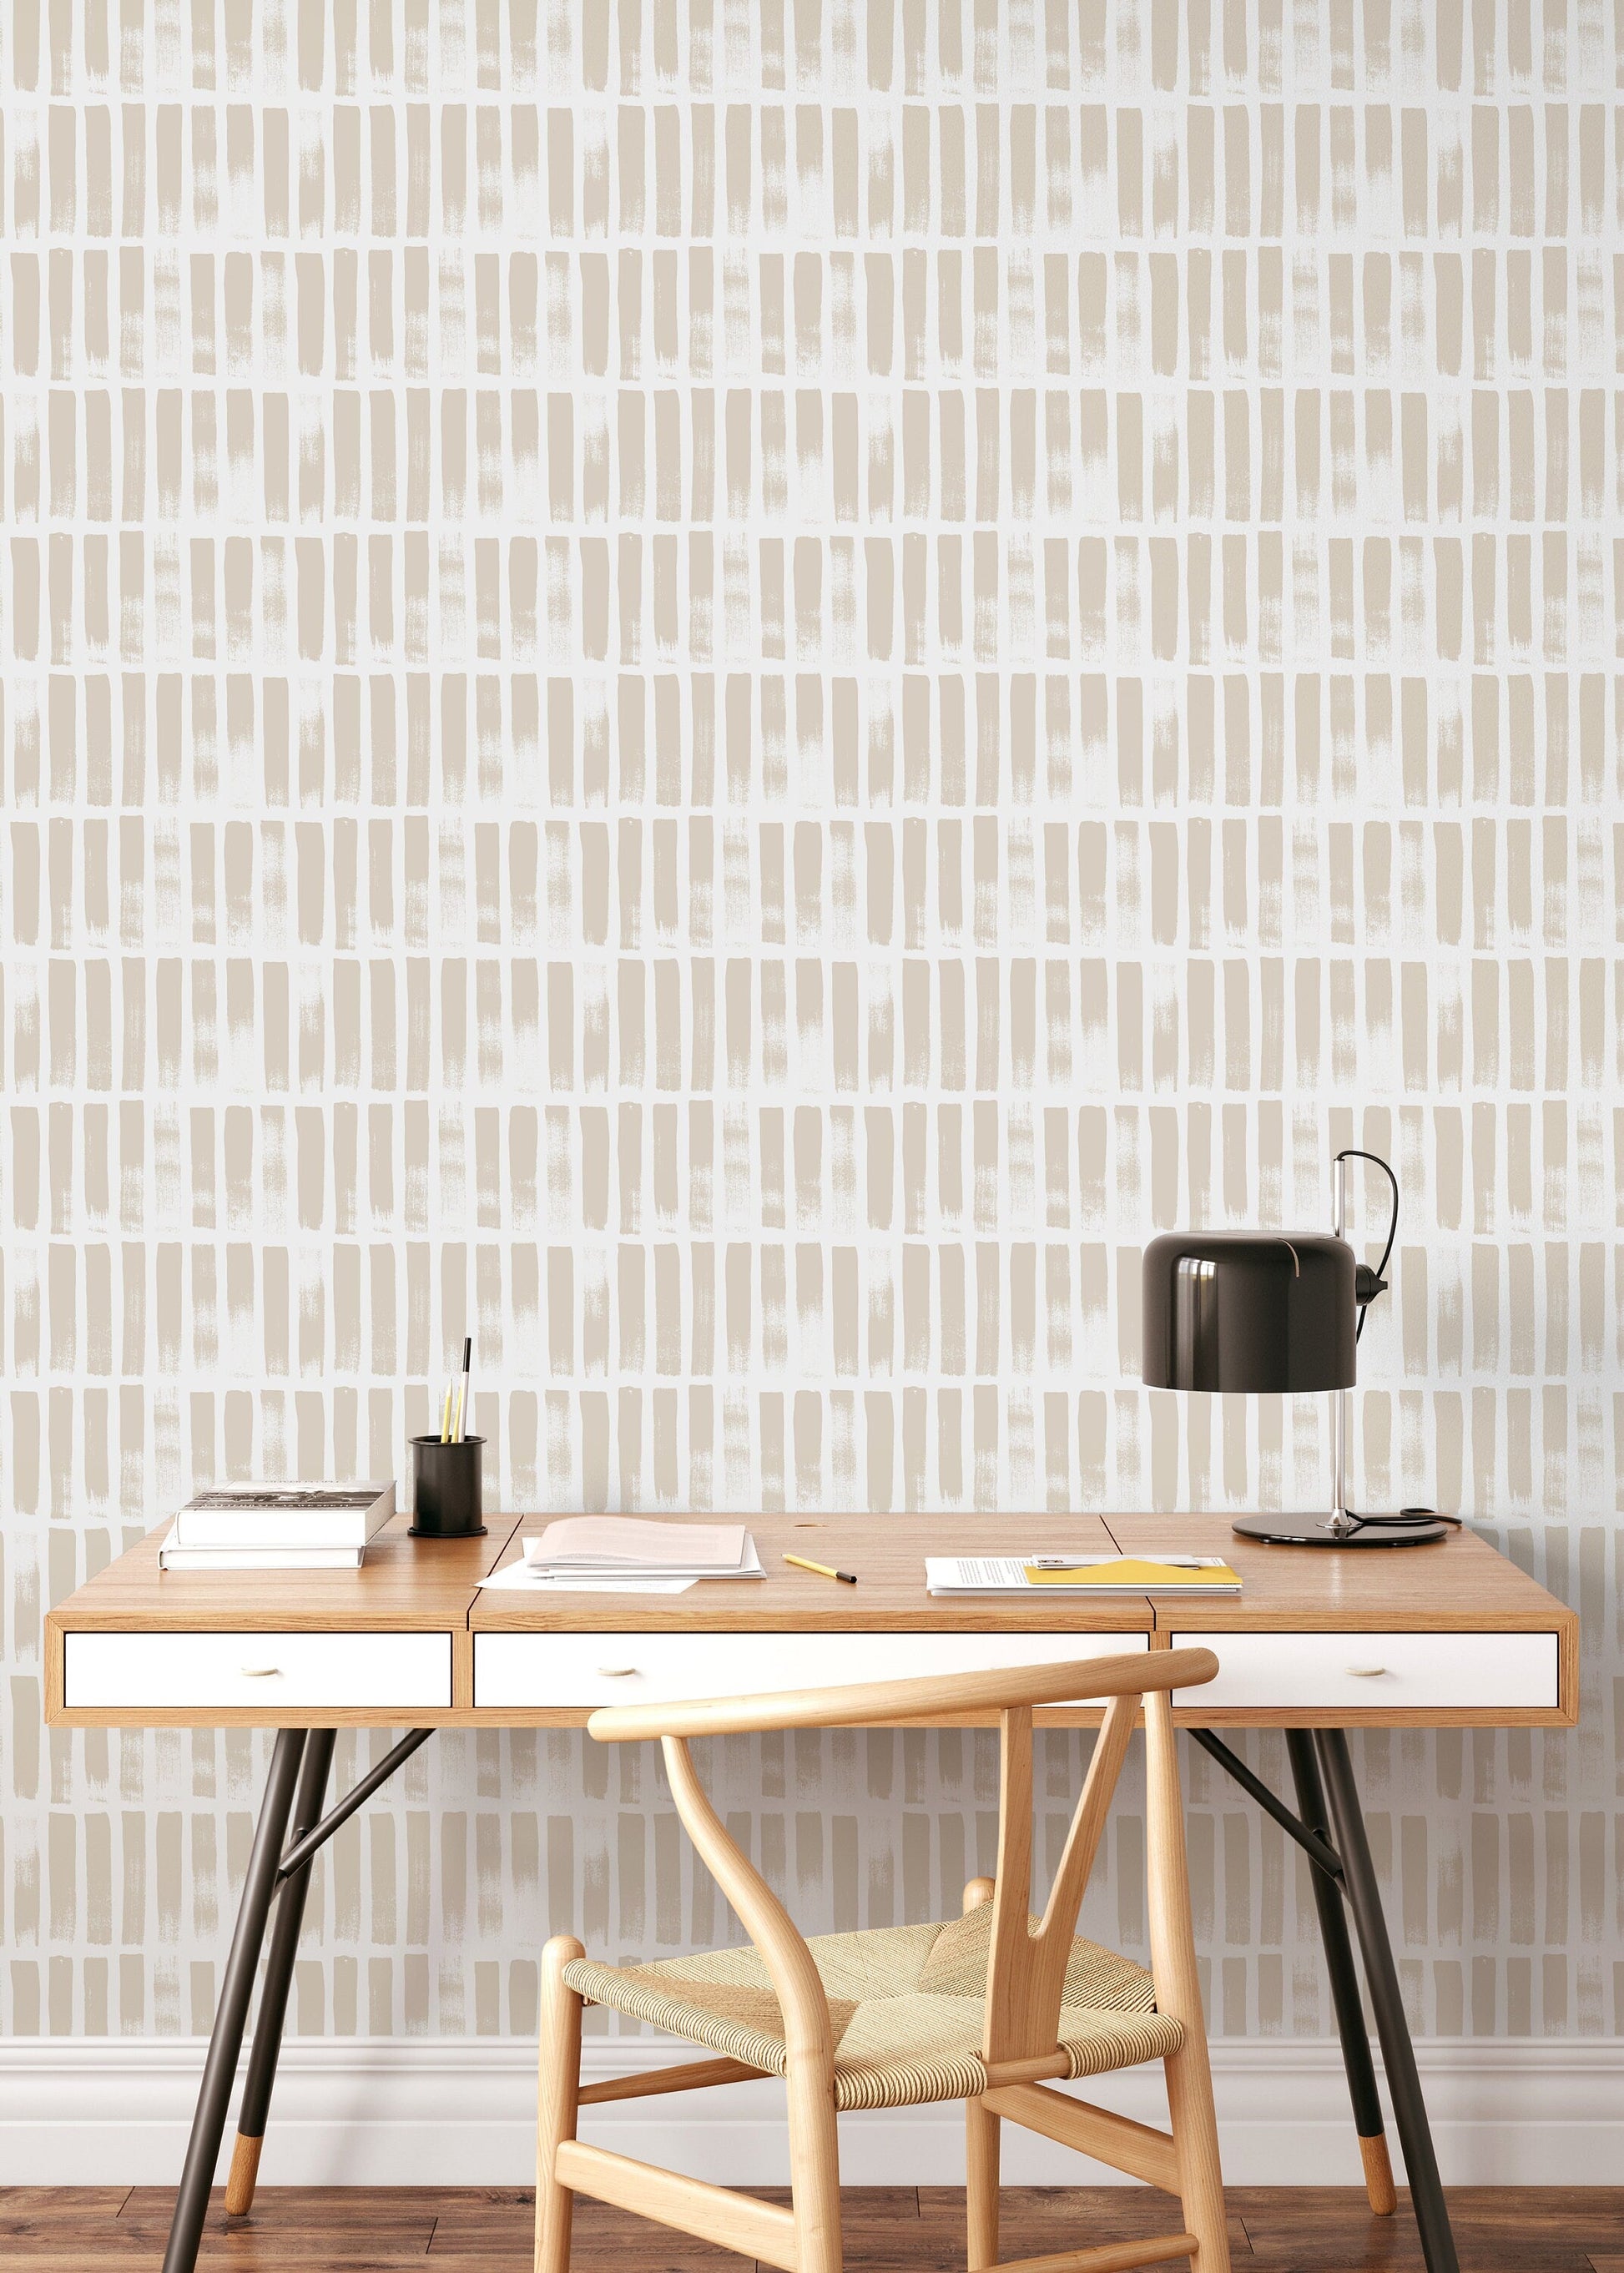 Paint Brush Dotted in Sand Wallpaper Abstract Removable and Repositionable Peel and Stick or Traditional Pre-pasted Wallpaper - ZADF